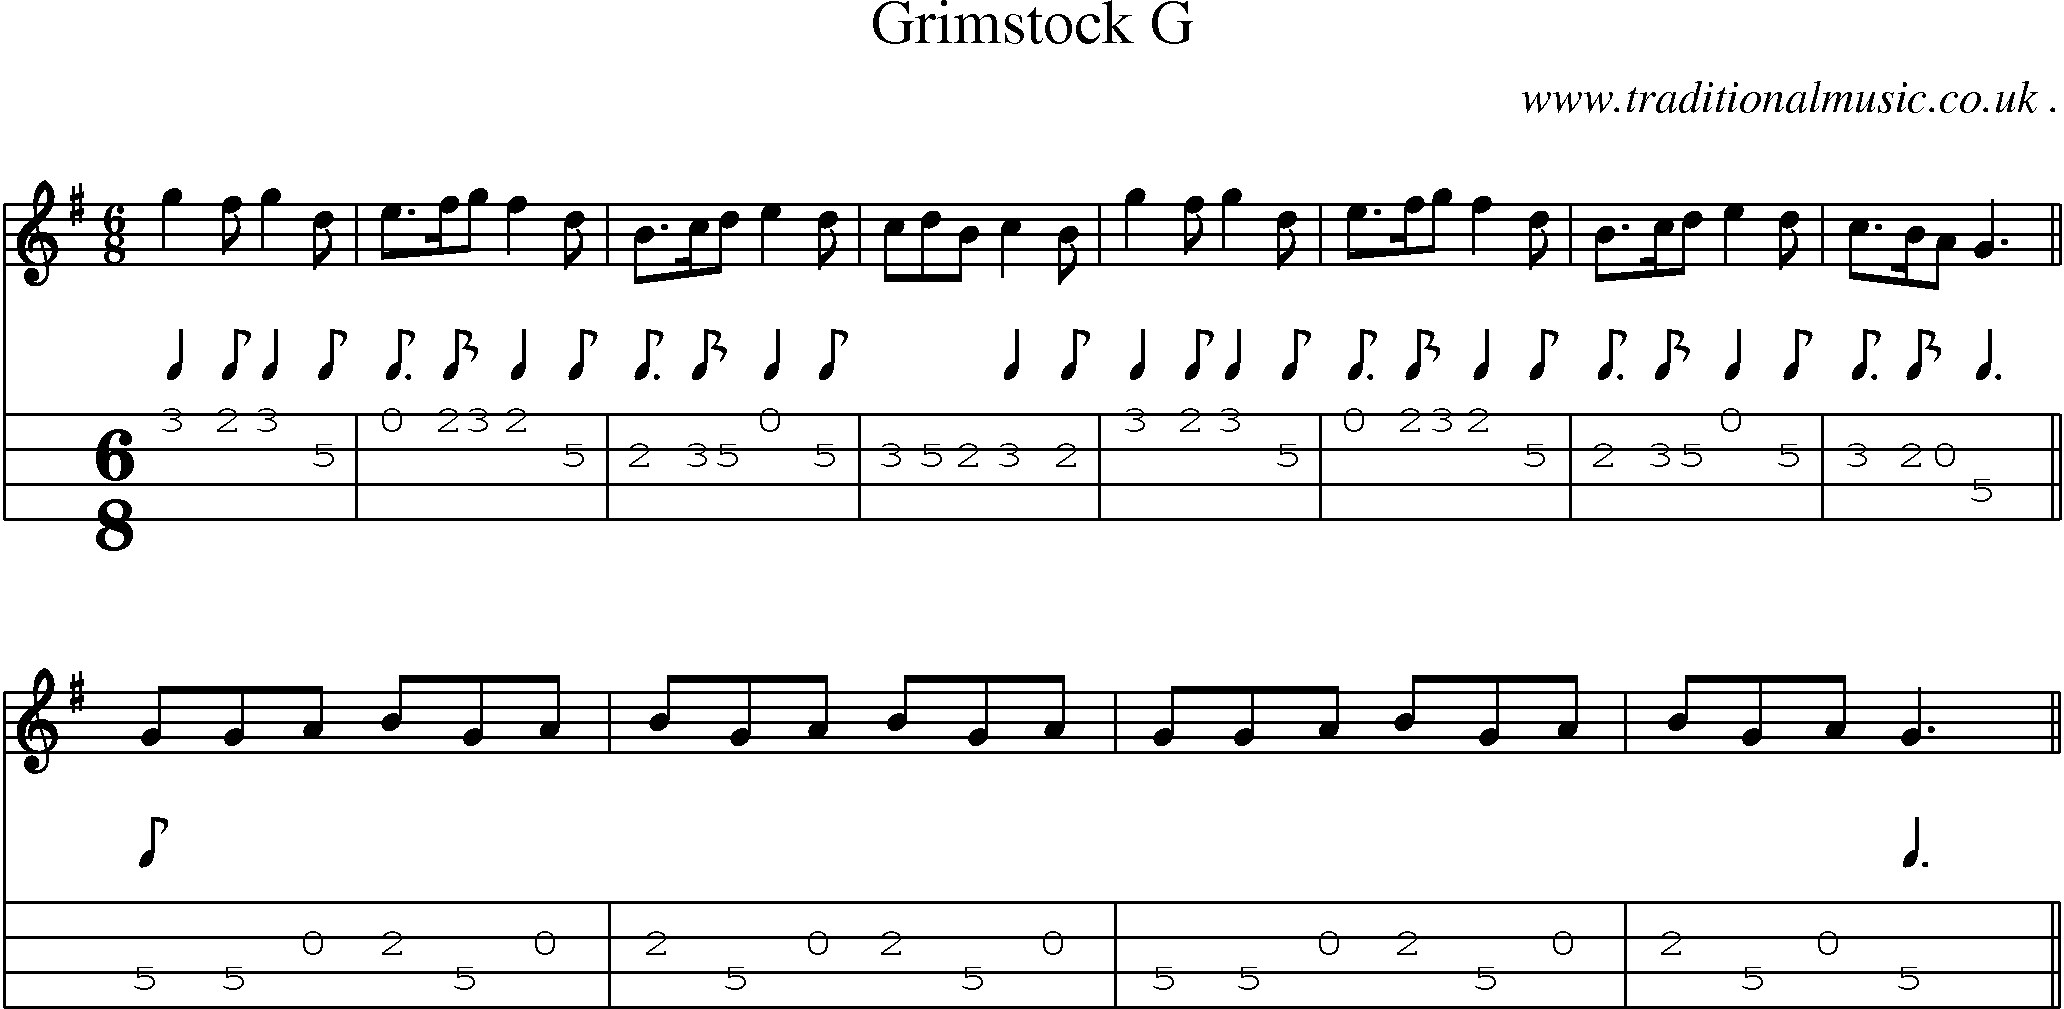 Sheet-Music and Mandolin Tabs for Grimstock G